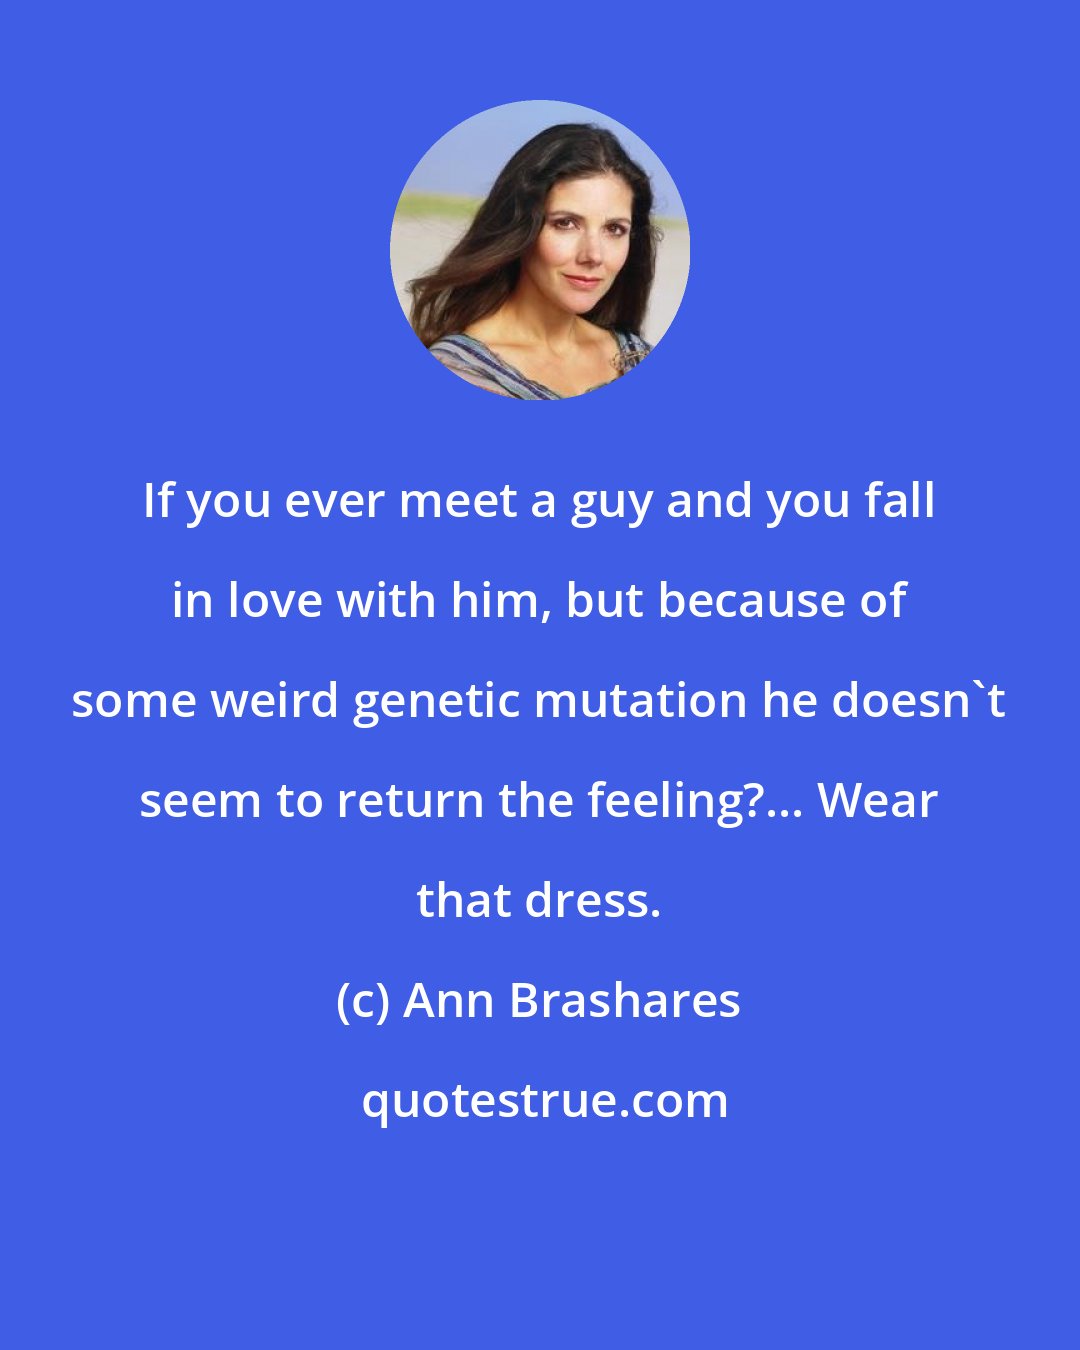 Ann Brashares: If you ever meet a guy and you fall in love with him, but because of some weird genetic mutation he doesn't seem to return the feeling?... Wear that dress.